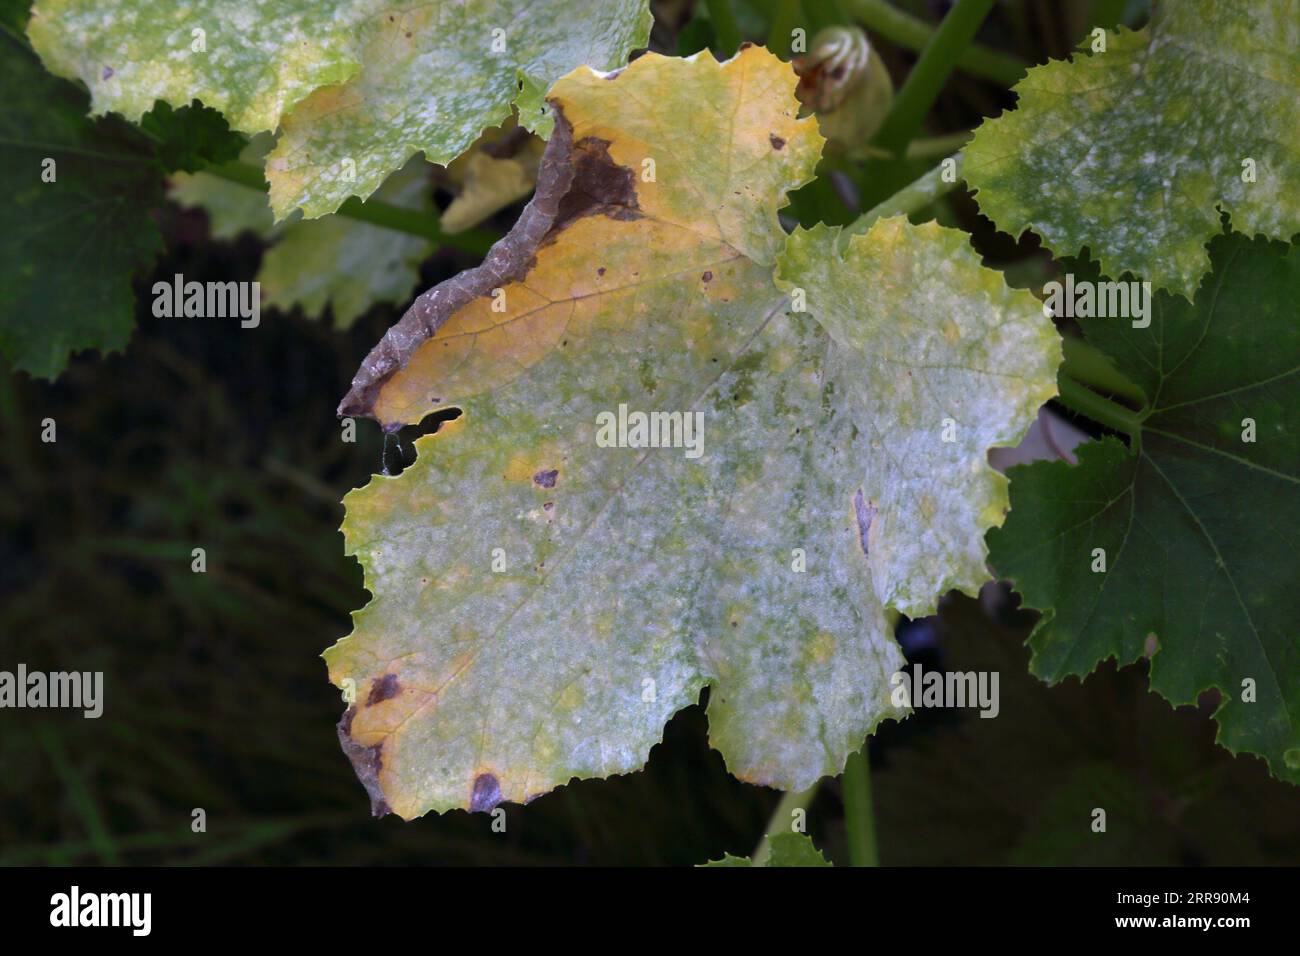 Powdery Mildew on Courgette Leaves a Common Fungal Disease Stock Photo